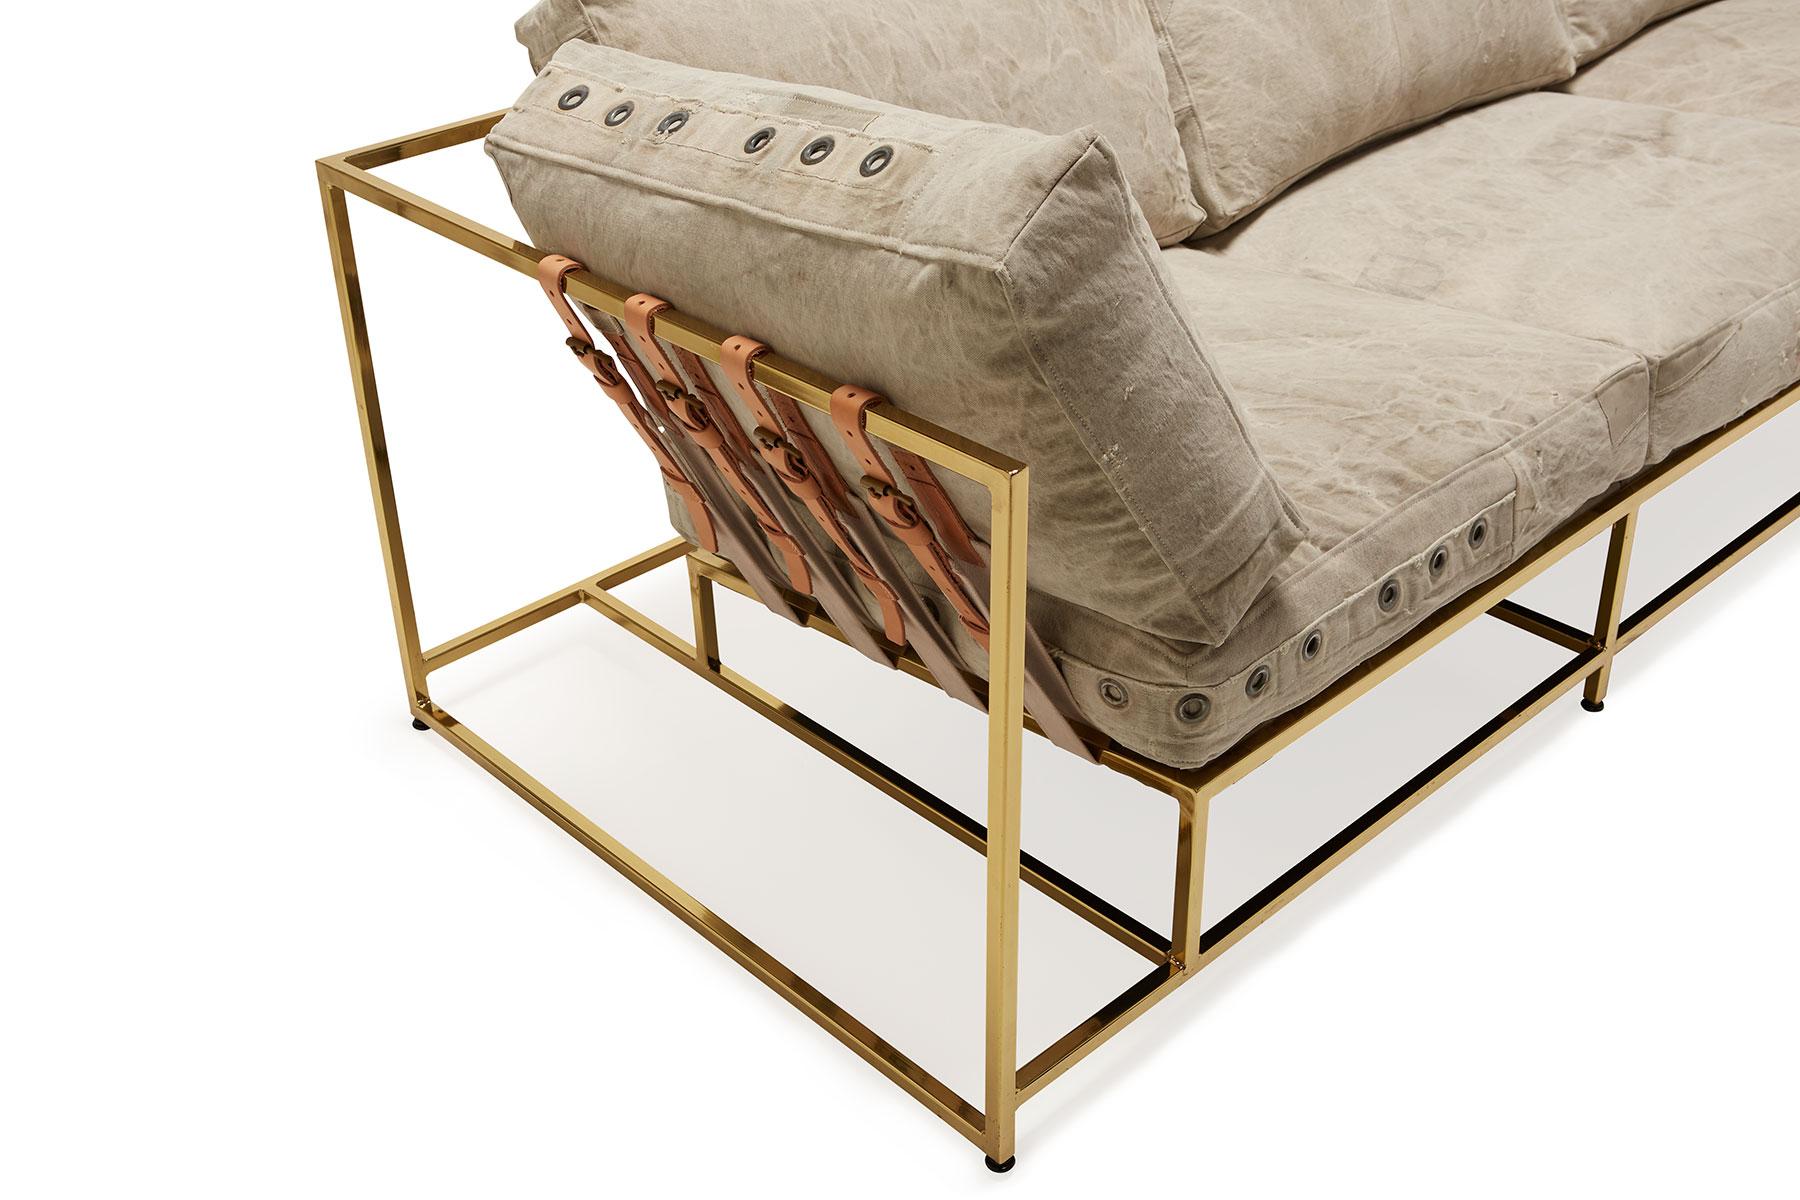 US Mailbag Canvas & Polished Brass Sofa In New Condition For Sale In Los Angeles, CA